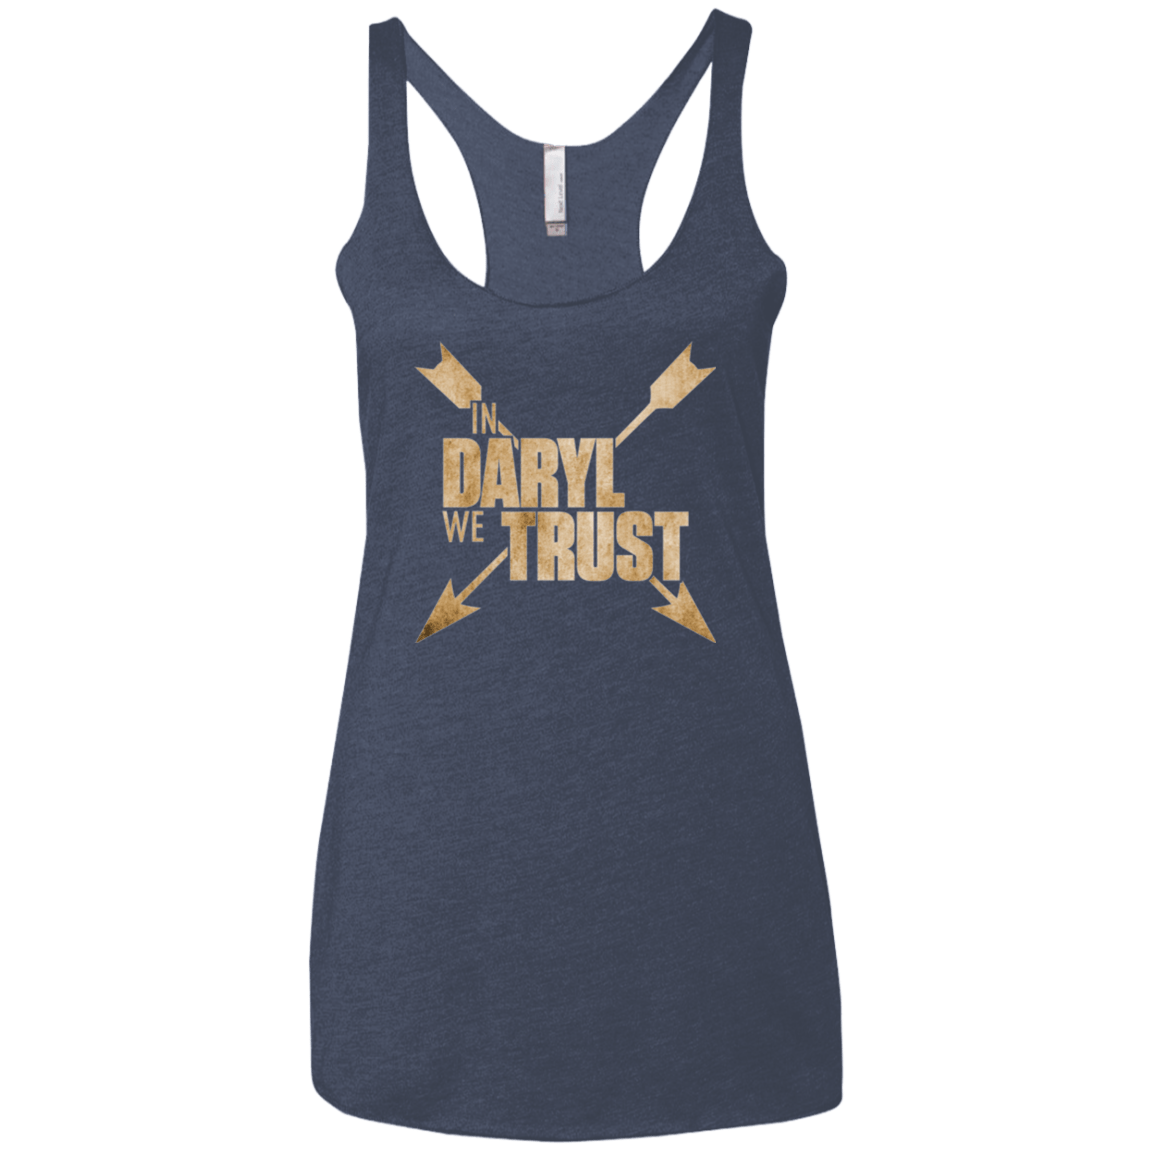 T-Shirts Vintage Navy / X-Small In Daryl We Trust Women's Triblend Racerback Tank